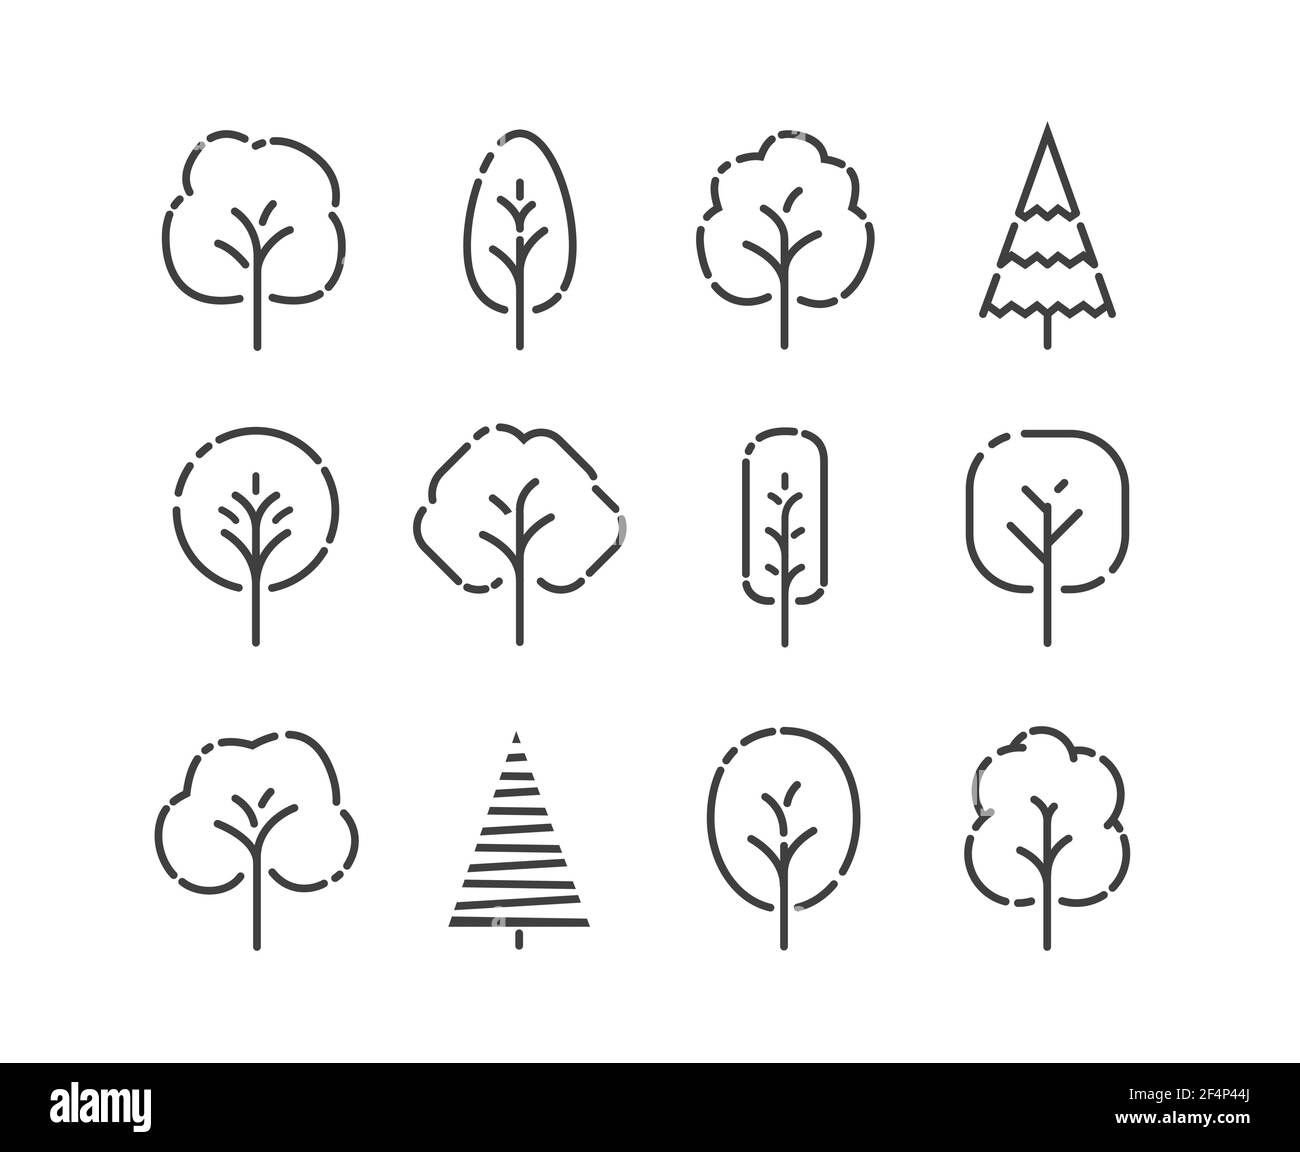 Tree icons set. Nature concept in linear style vector Stock Vector